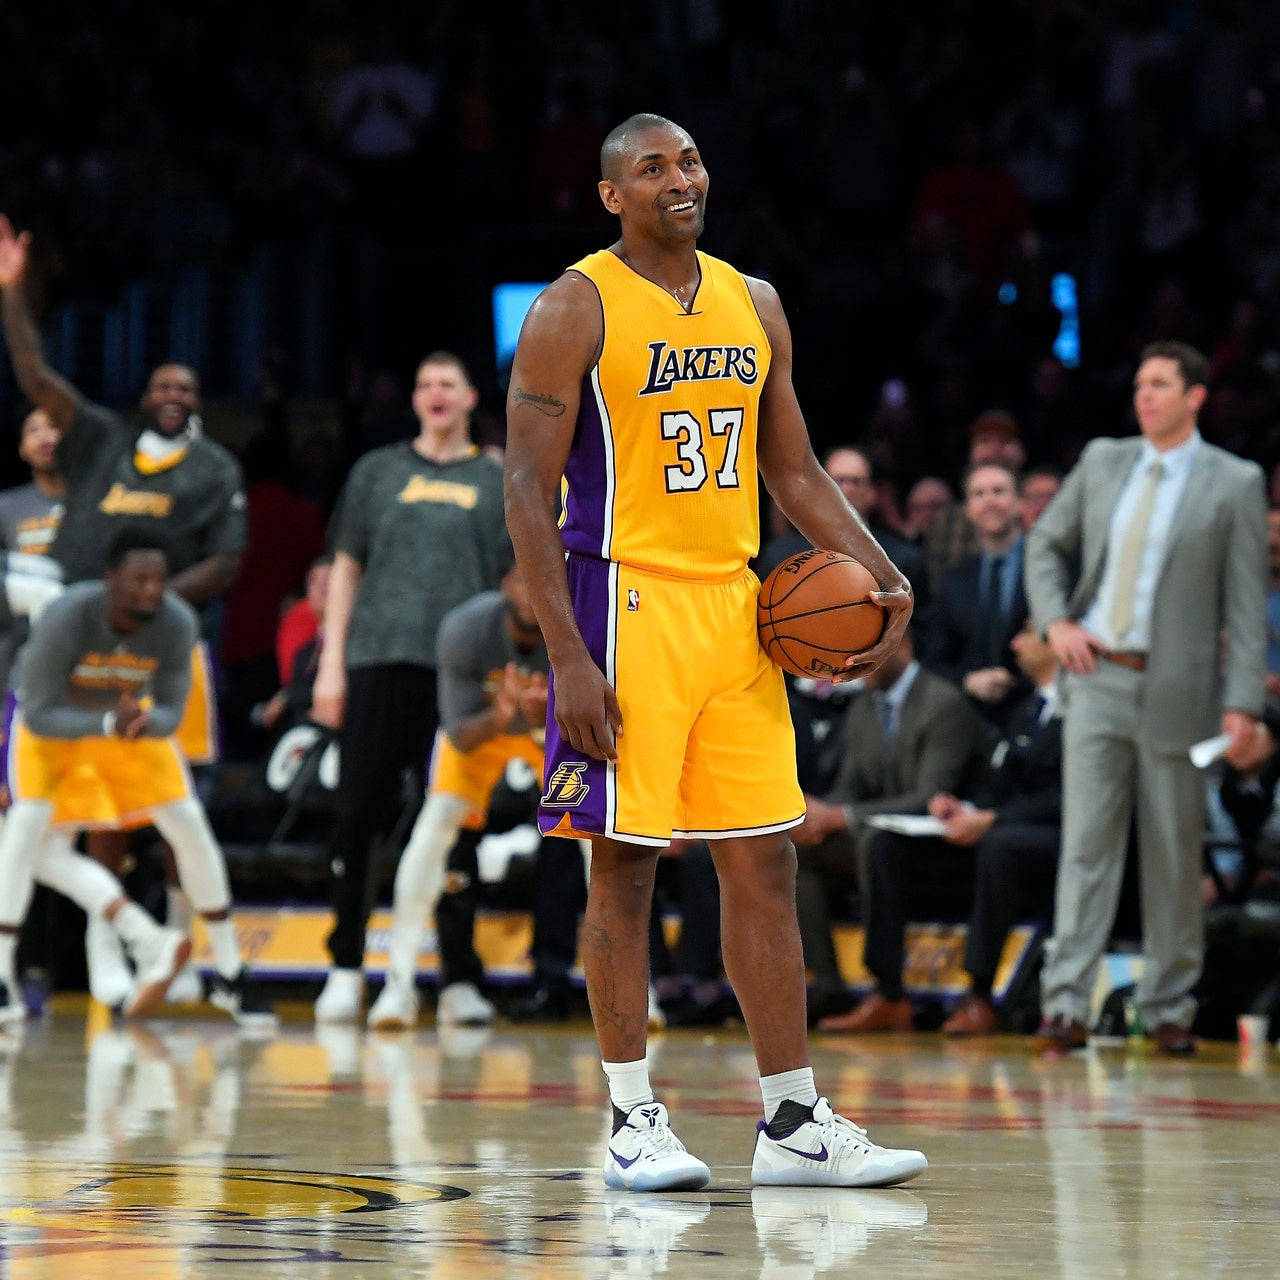 Jermaine O'Neal, Metta World Peace talking for first time since brawl